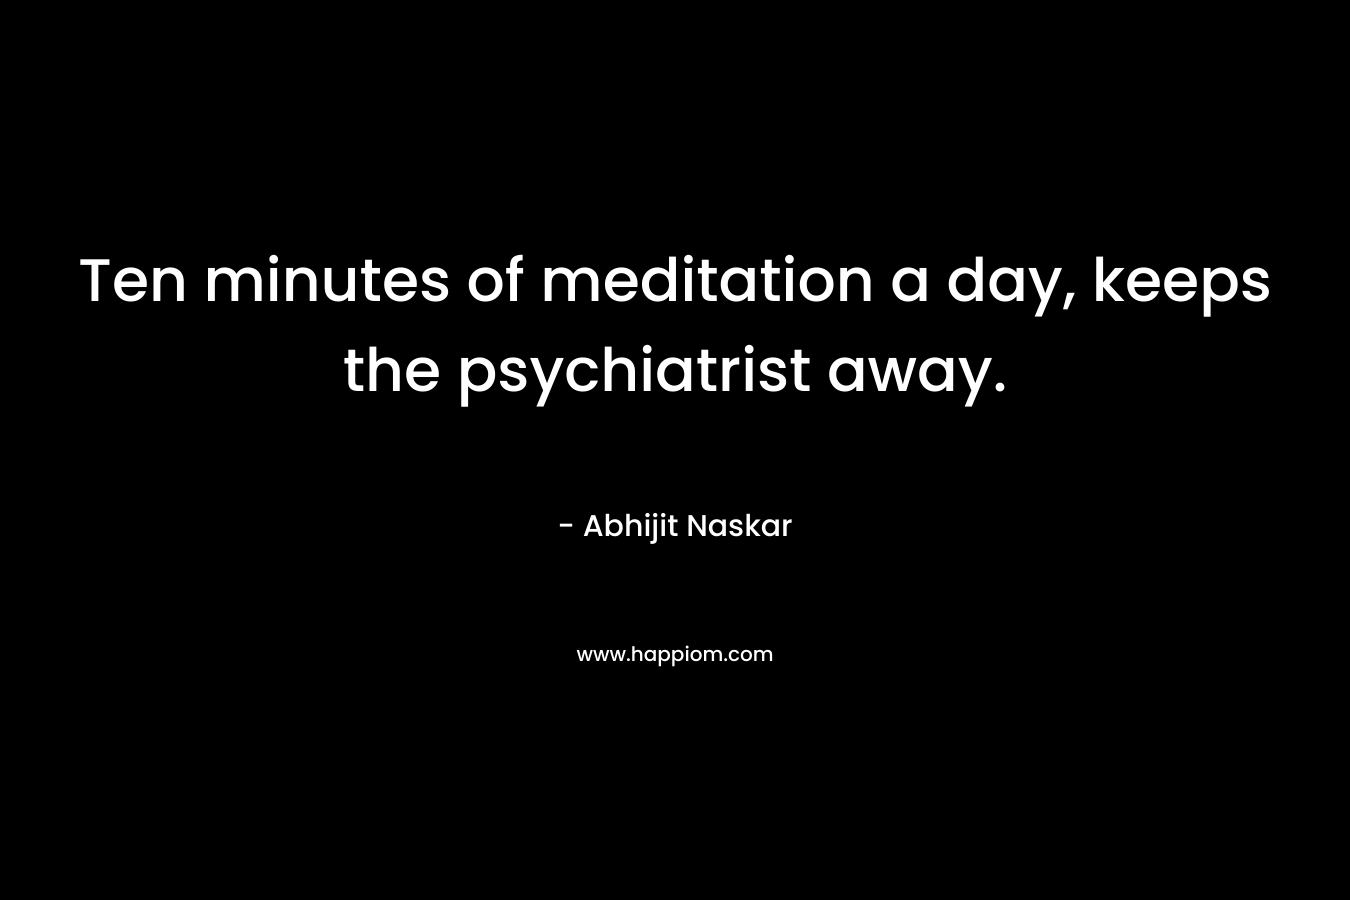 Ten minutes of meditation a day, keeps the psychiatrist away.